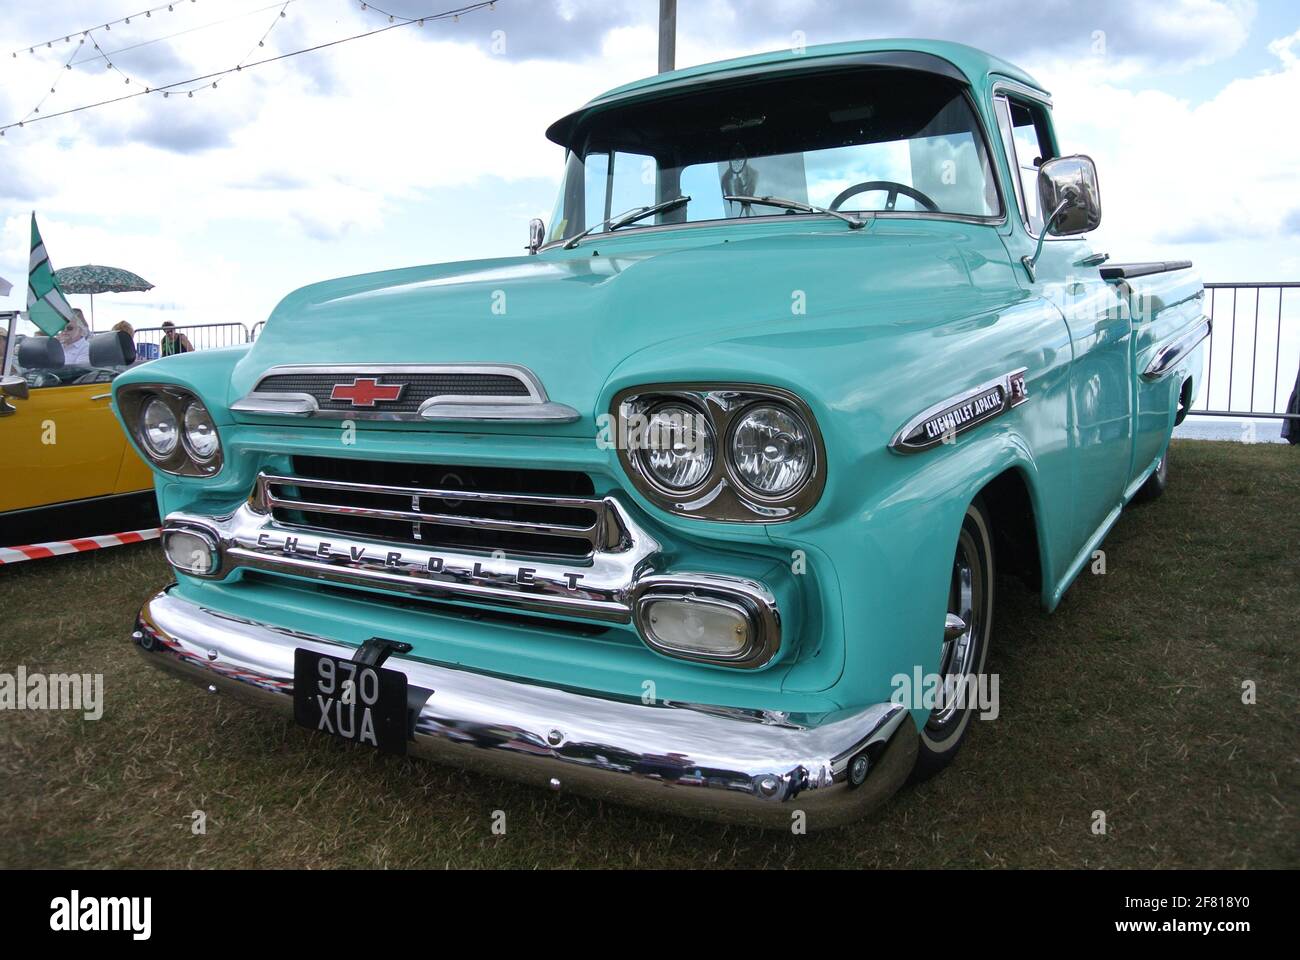 A 1959 Chevrolet GMC Apache pickup truck parked up on display at the English Riviera classic car show, Paignton, Devon, England. UK. Stock Photo